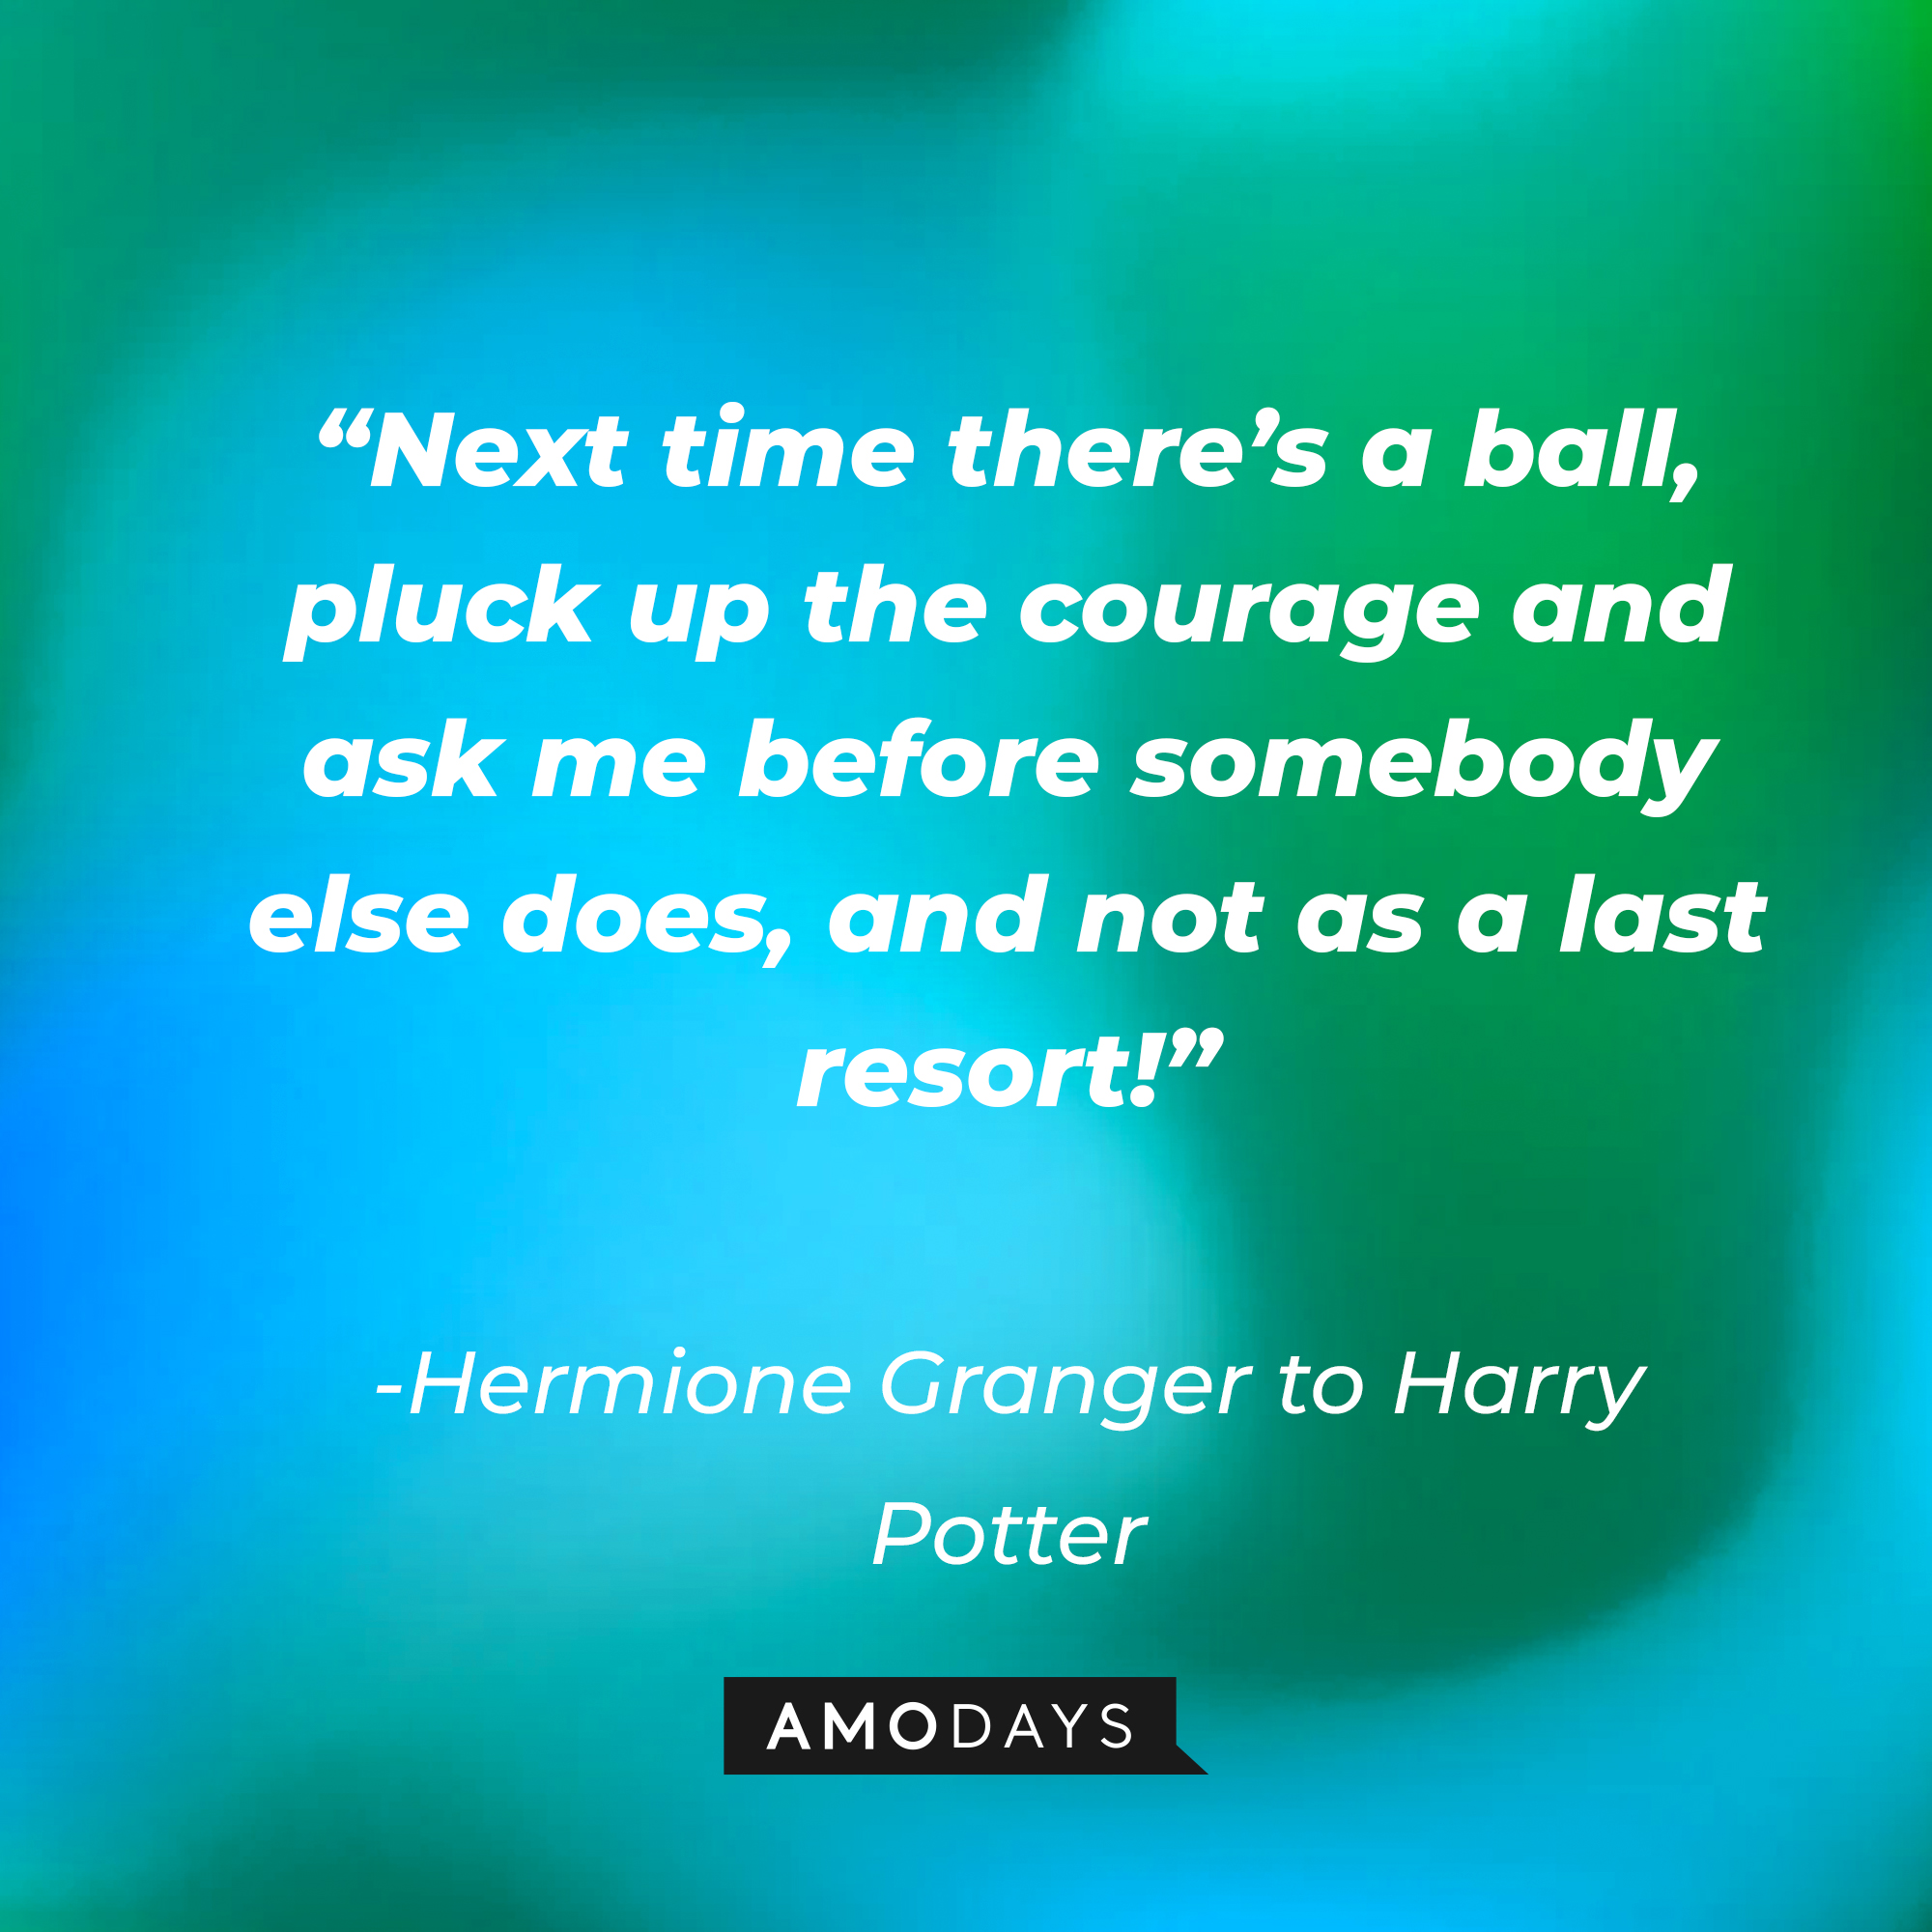 Hermione Granger's quote: “Next time there’s a ball, pluck up the courage and ask me before somebody else does, and not as a last resort!” | Image: Amodays